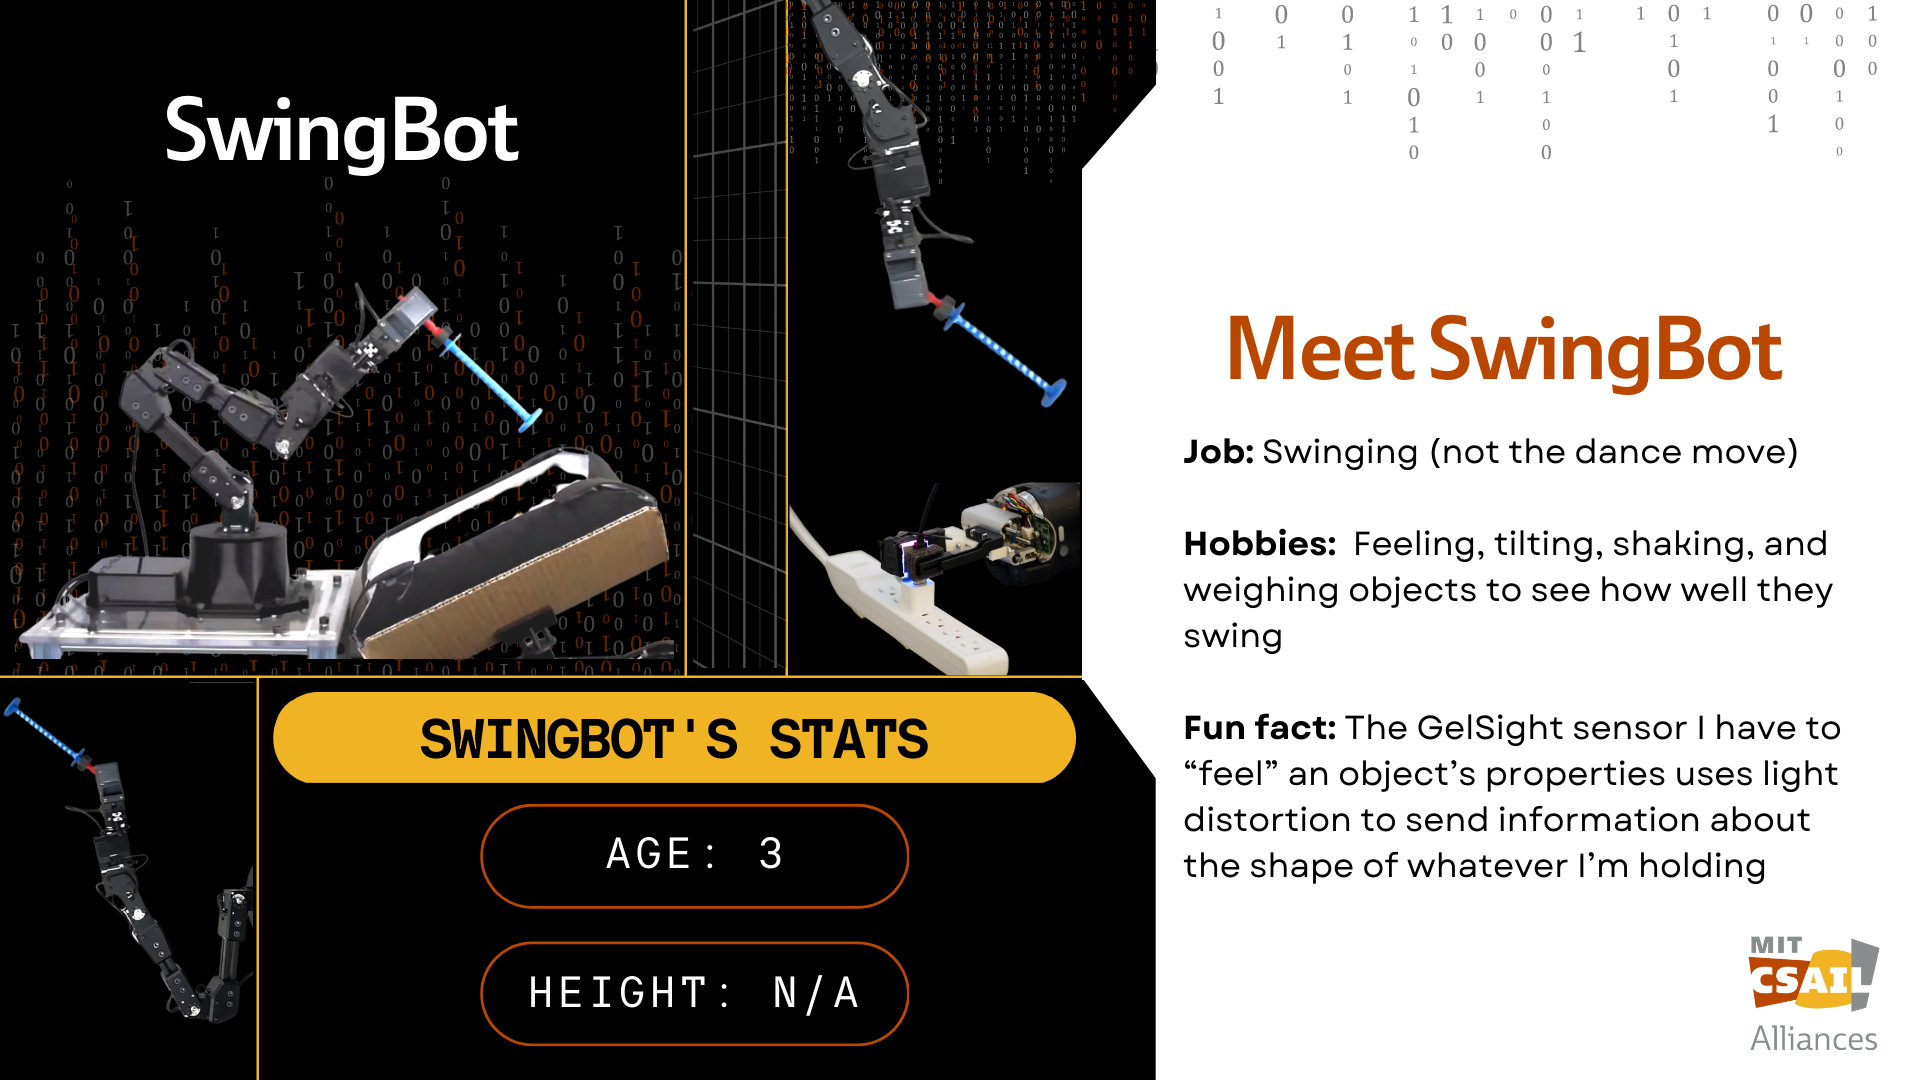 SwingBot robot with text that reads "SwingBot"